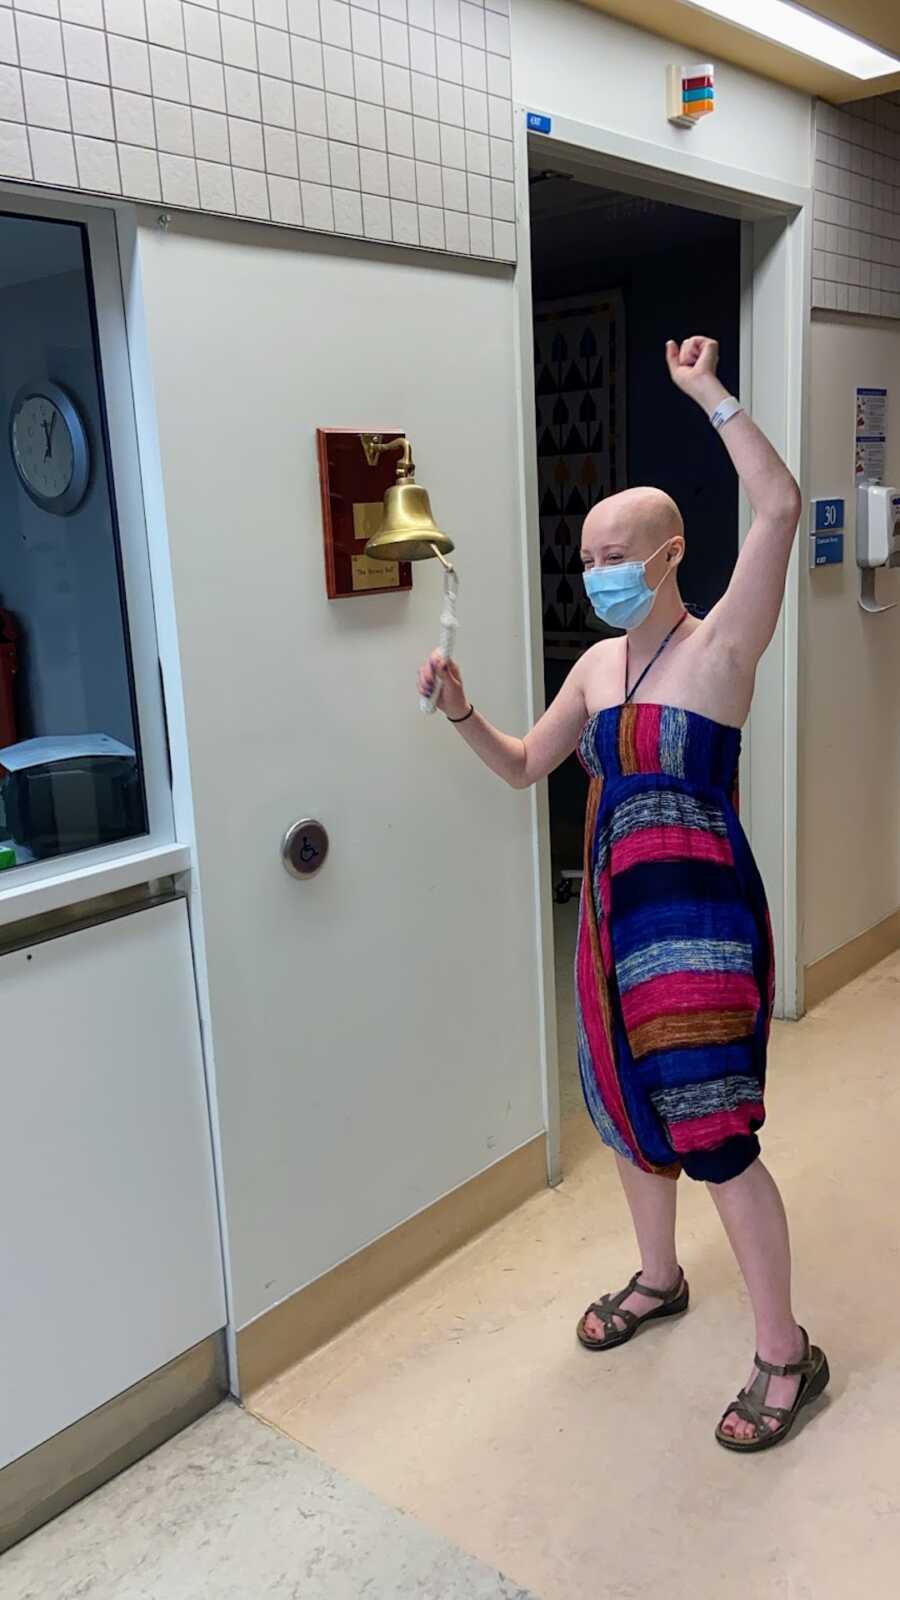 Cancer patient ringing bell